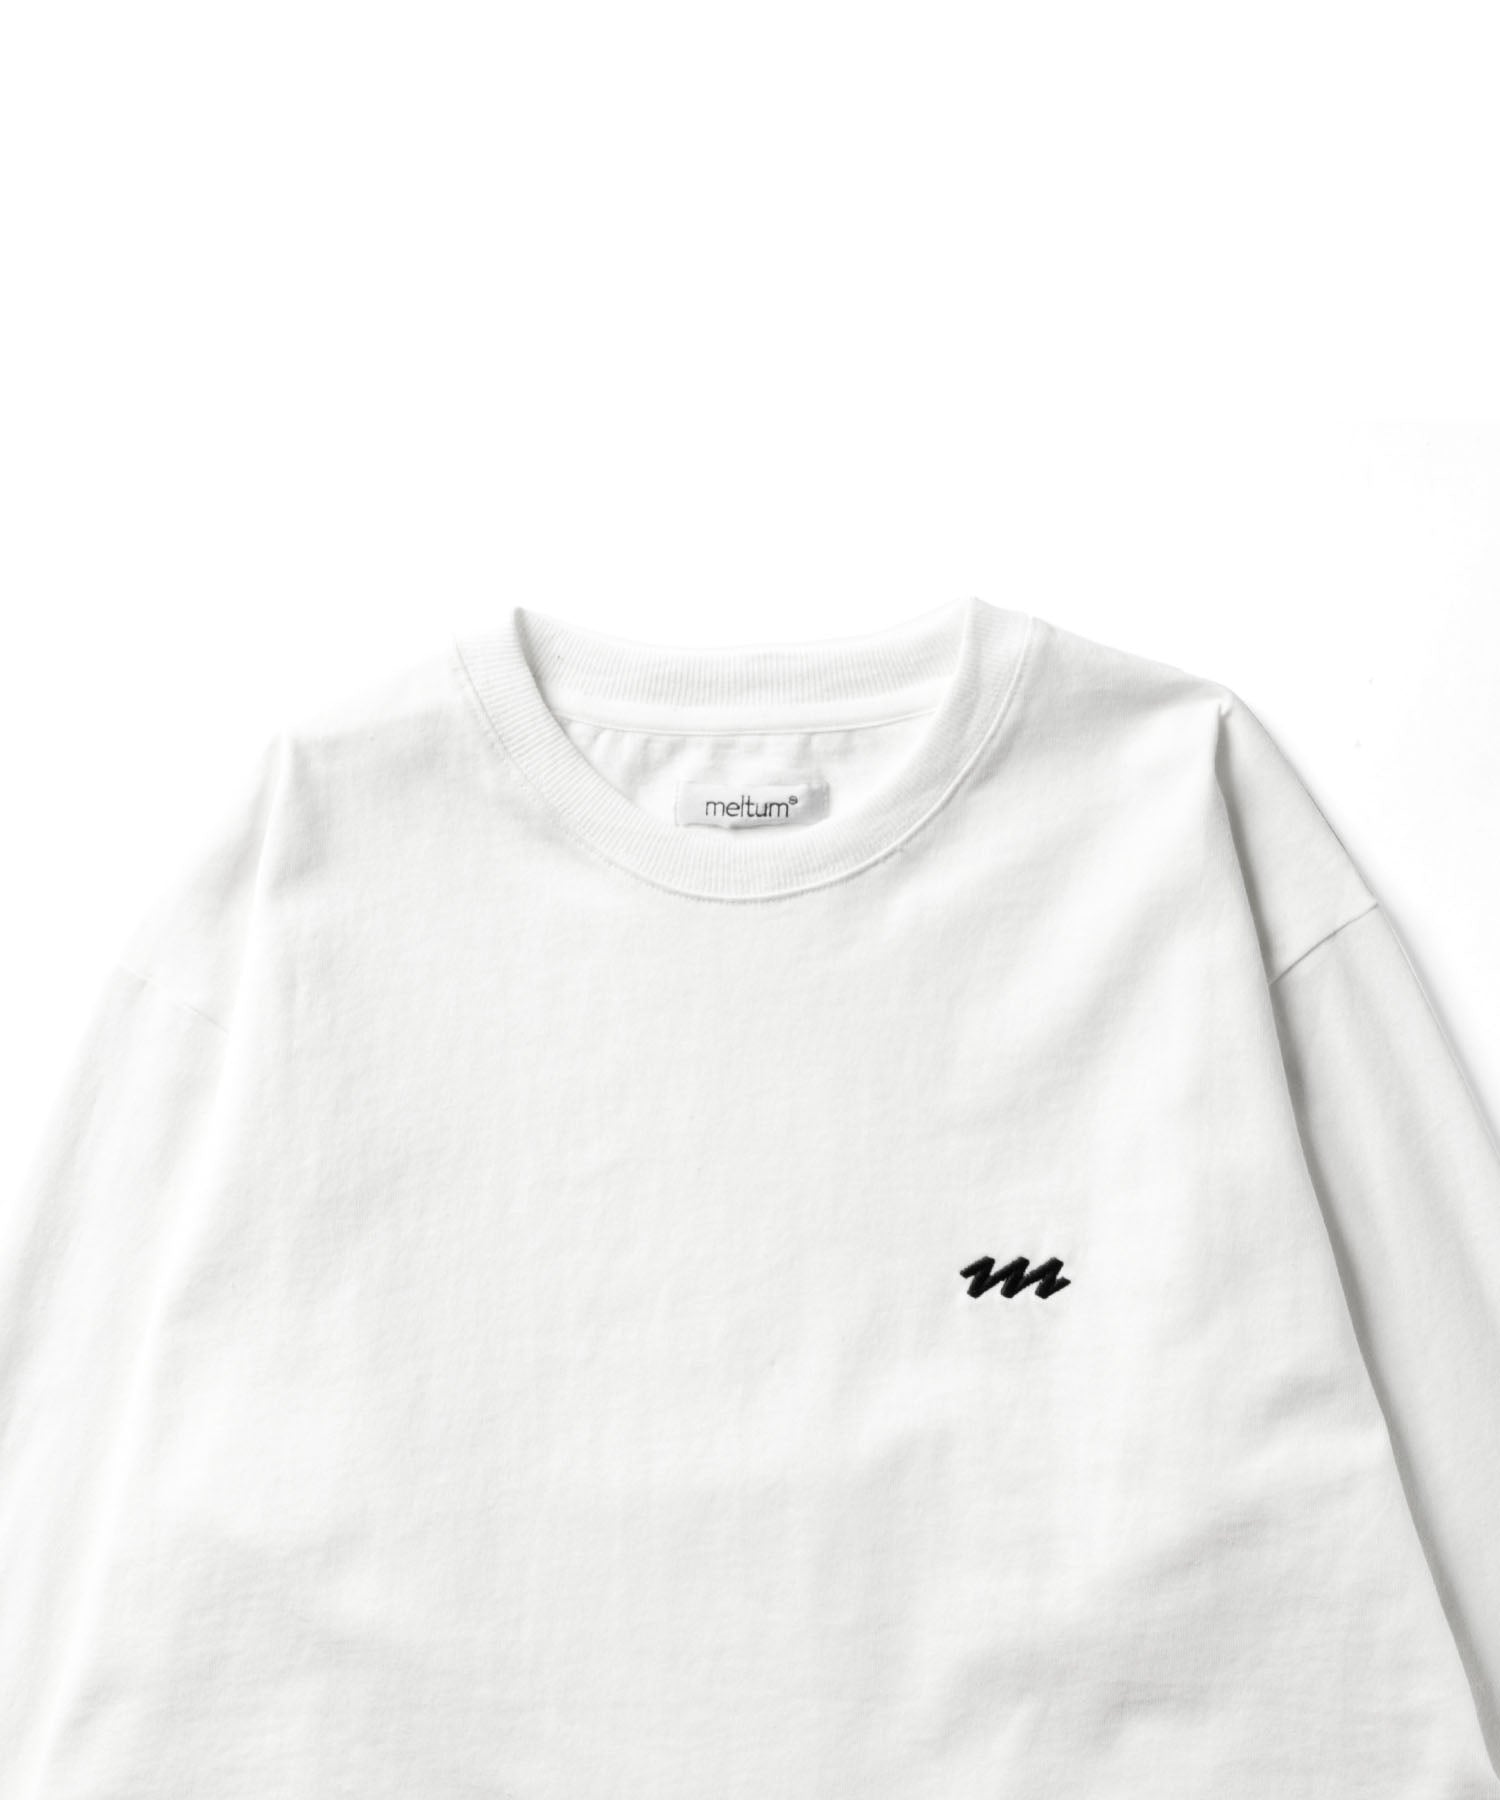 EMBROIDERY LOGO L/S T-SHIRT